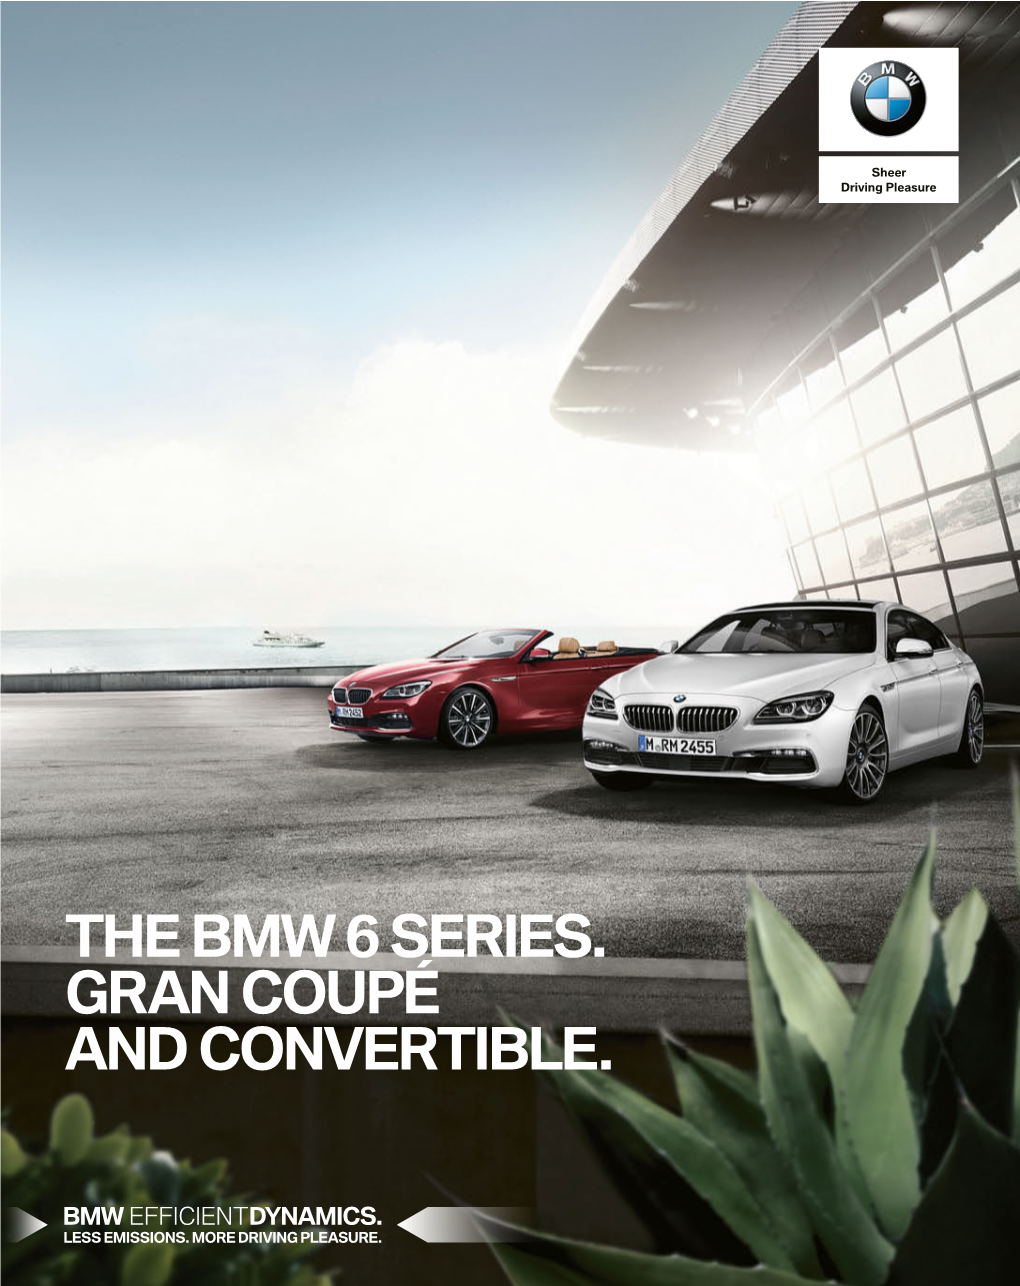 The Bmw 6 Series. Gran Coupé and Convertible